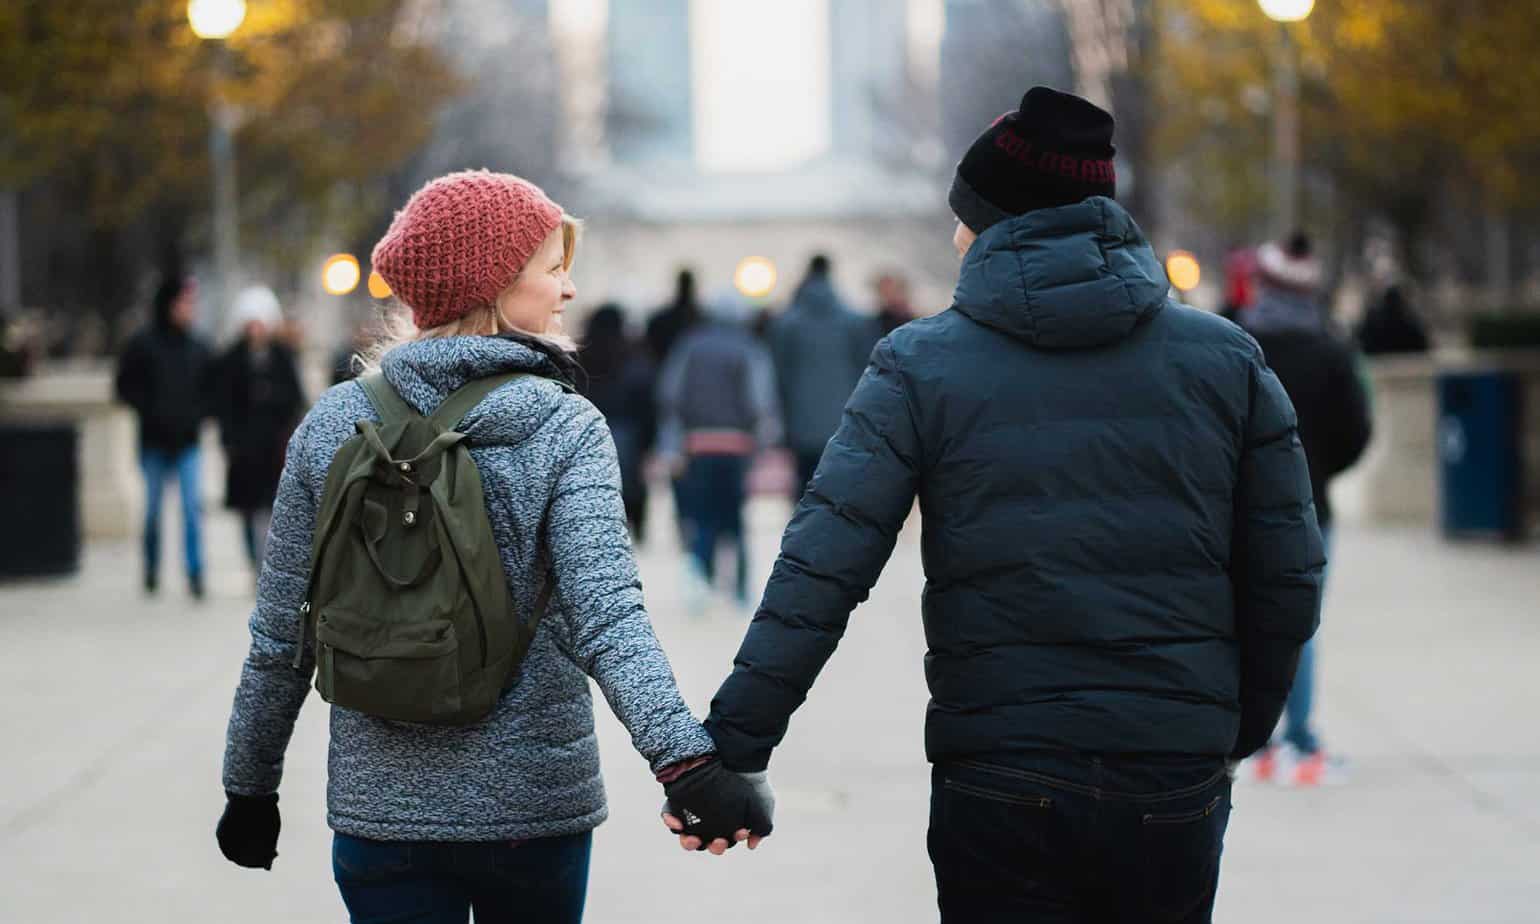 How to Develop Healthy Relationships in Recovery